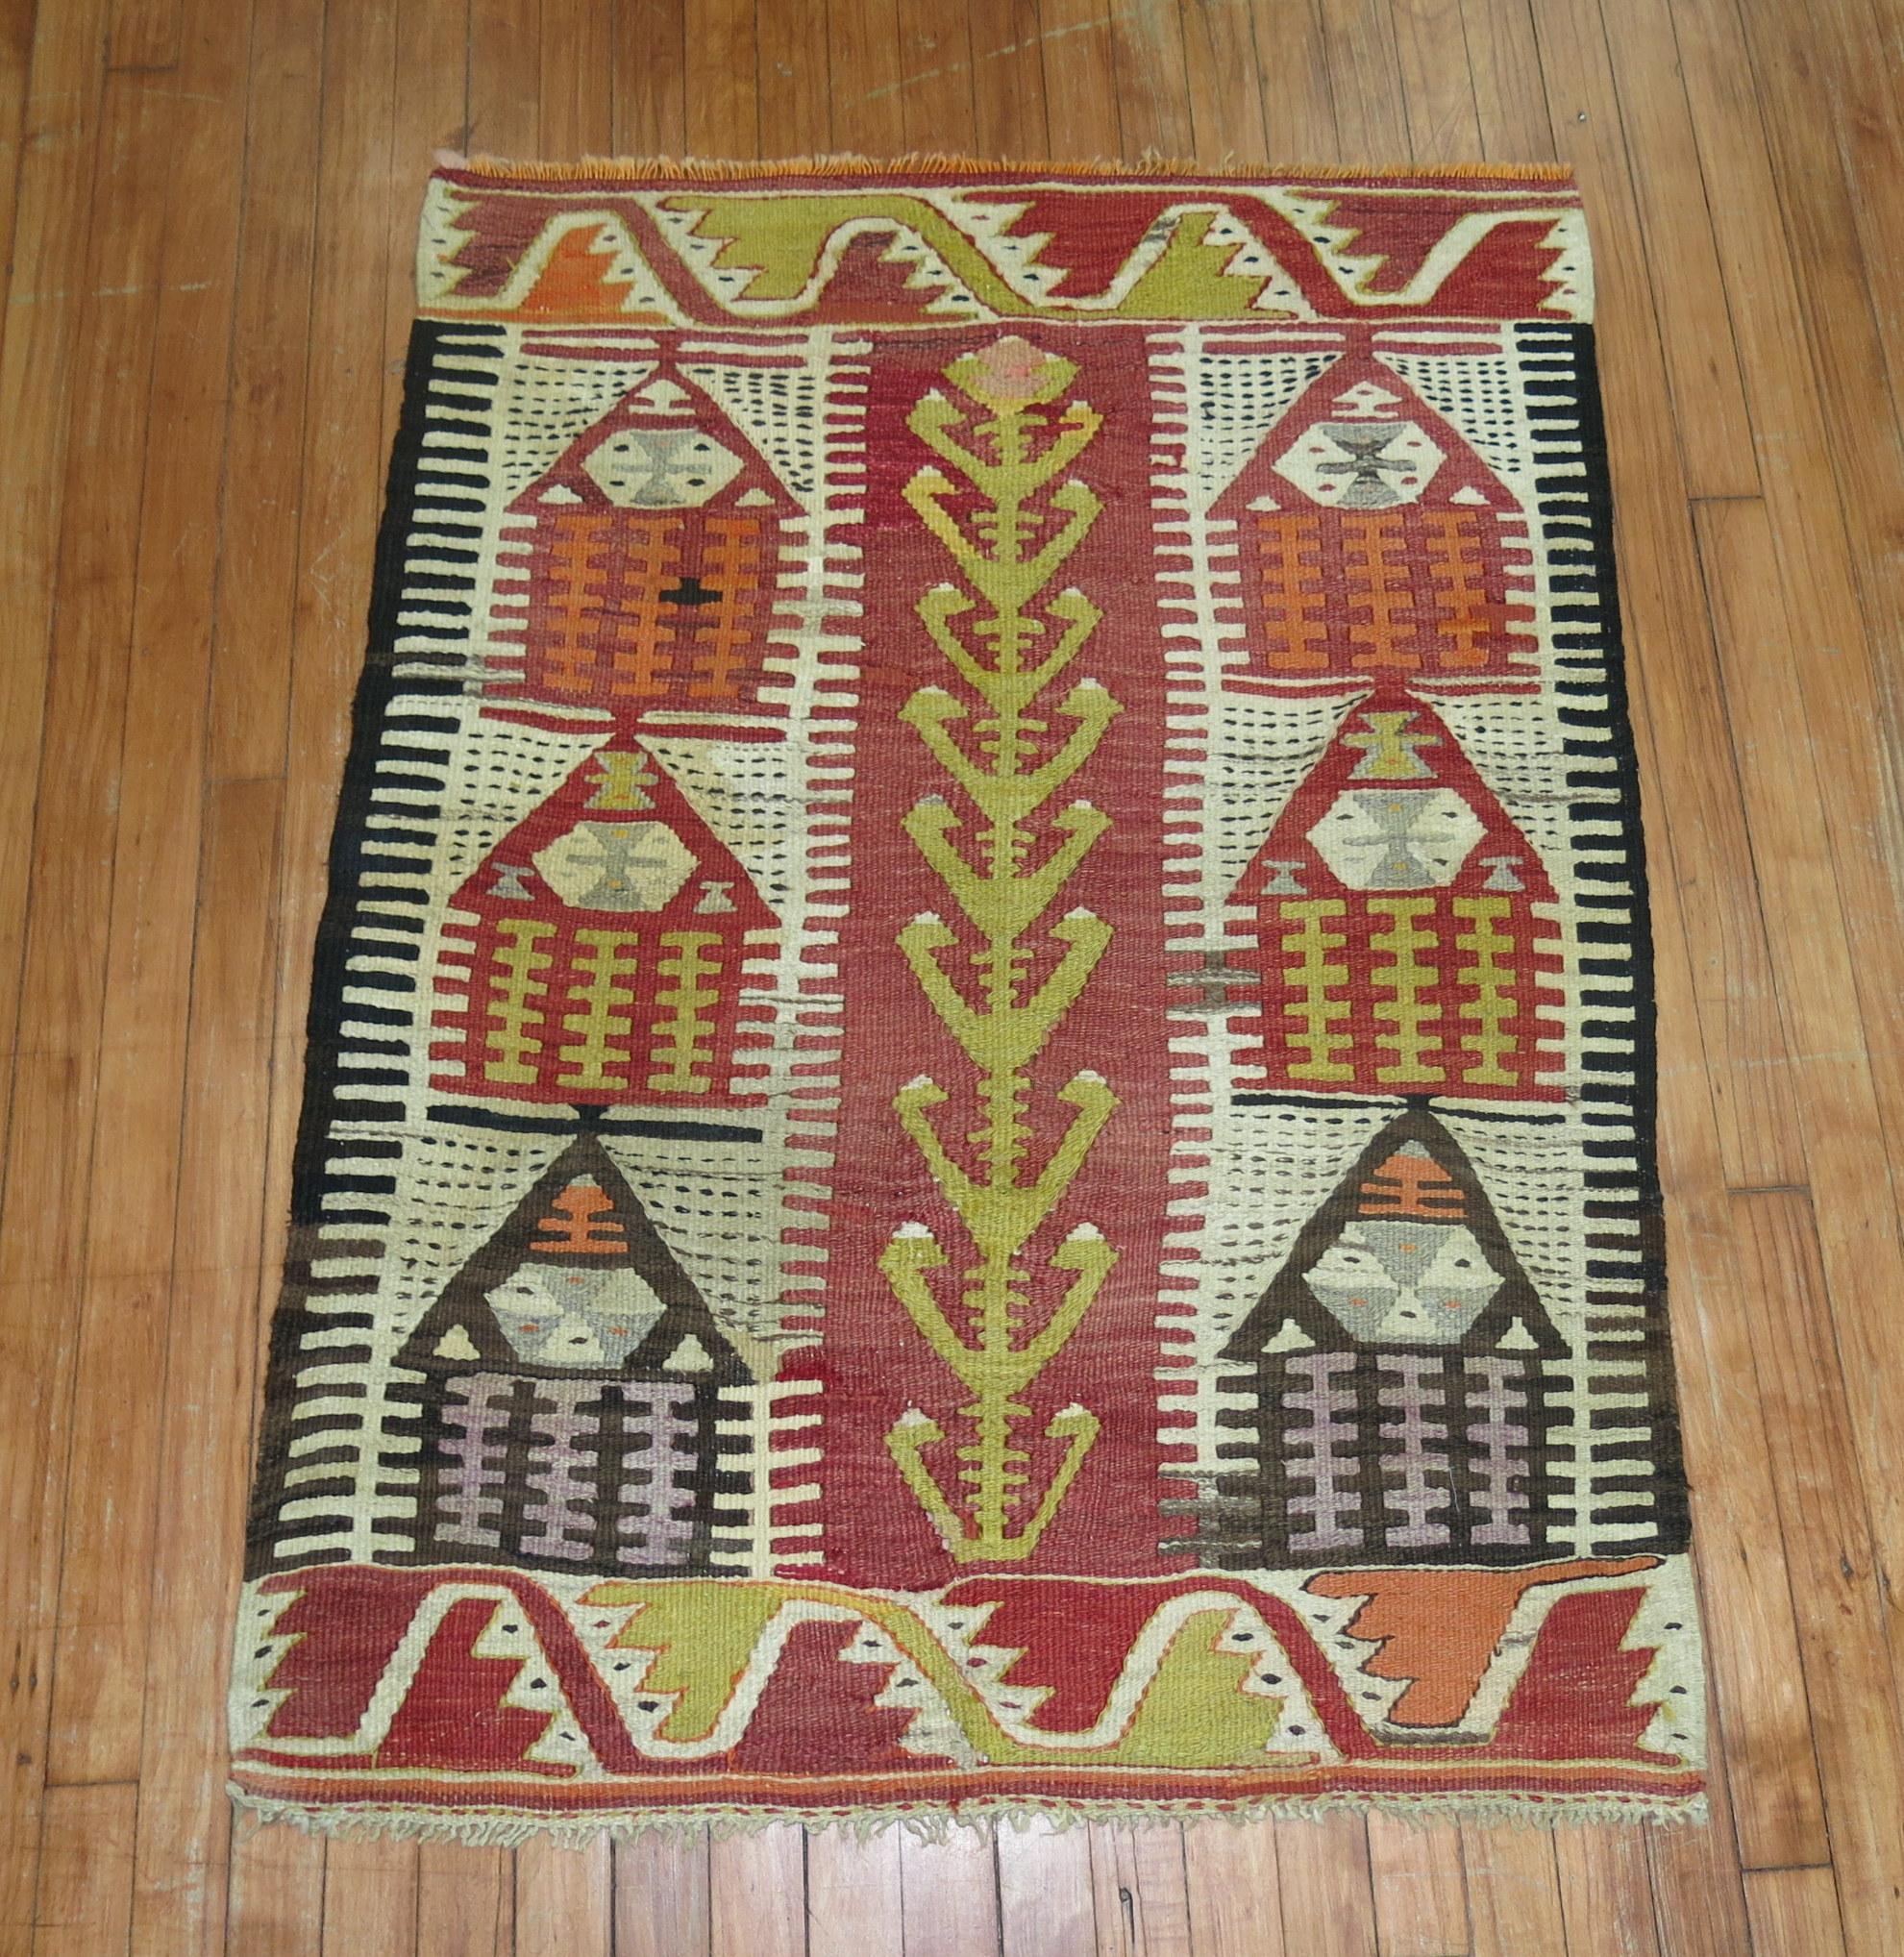 Prayer Turkish Kilim from the mid-20th century

Measures: 3' x 4'1